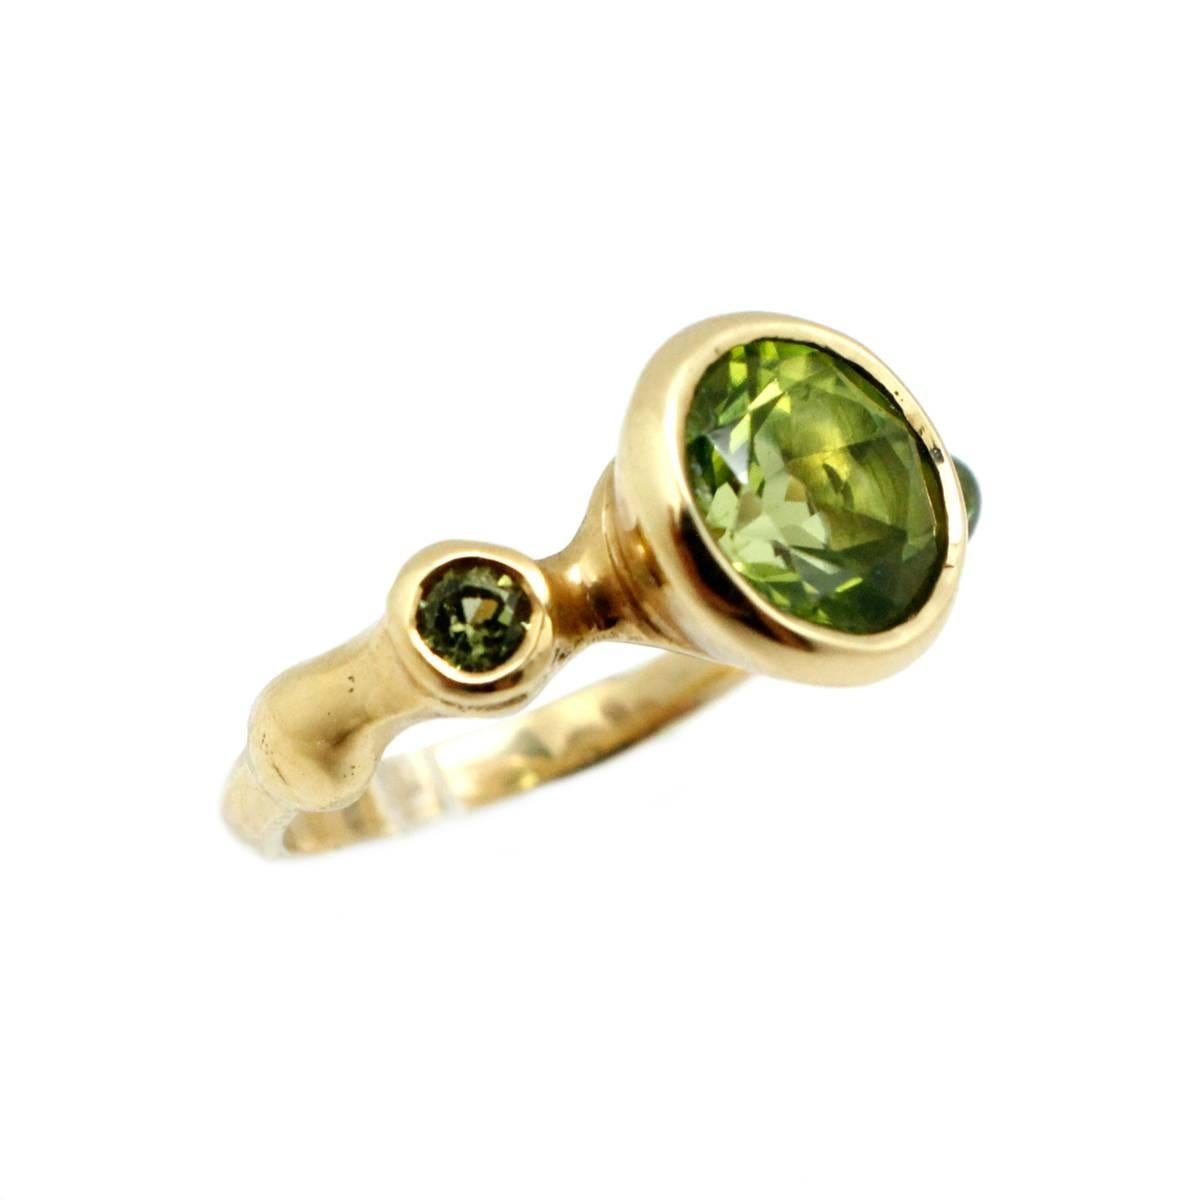 Designer Lee Brevard Vivid Yellowish Green Peridot Set in 18kt Yellow Gold Ring  In New Condition For Sale In Scottsdale, AZ